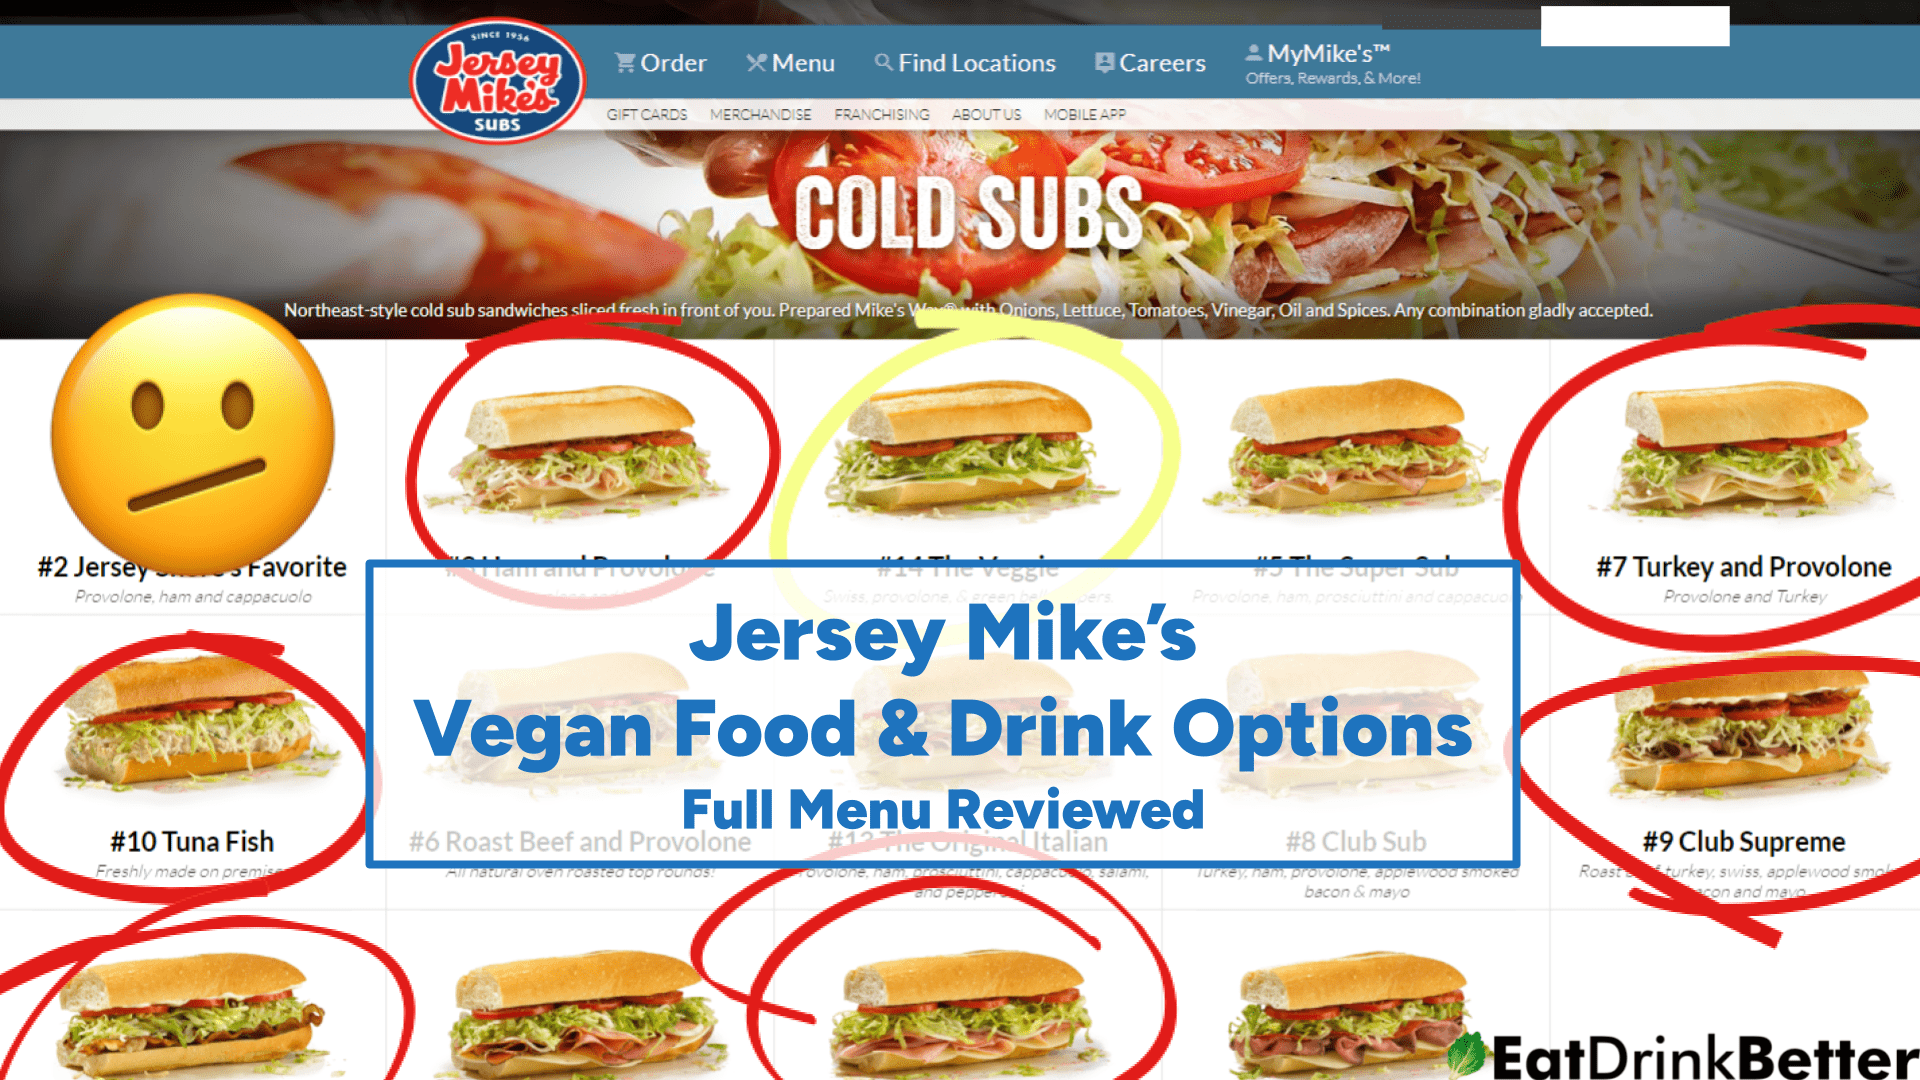 8 Club Sub - Cold Subs - Jersey Mike's Subs